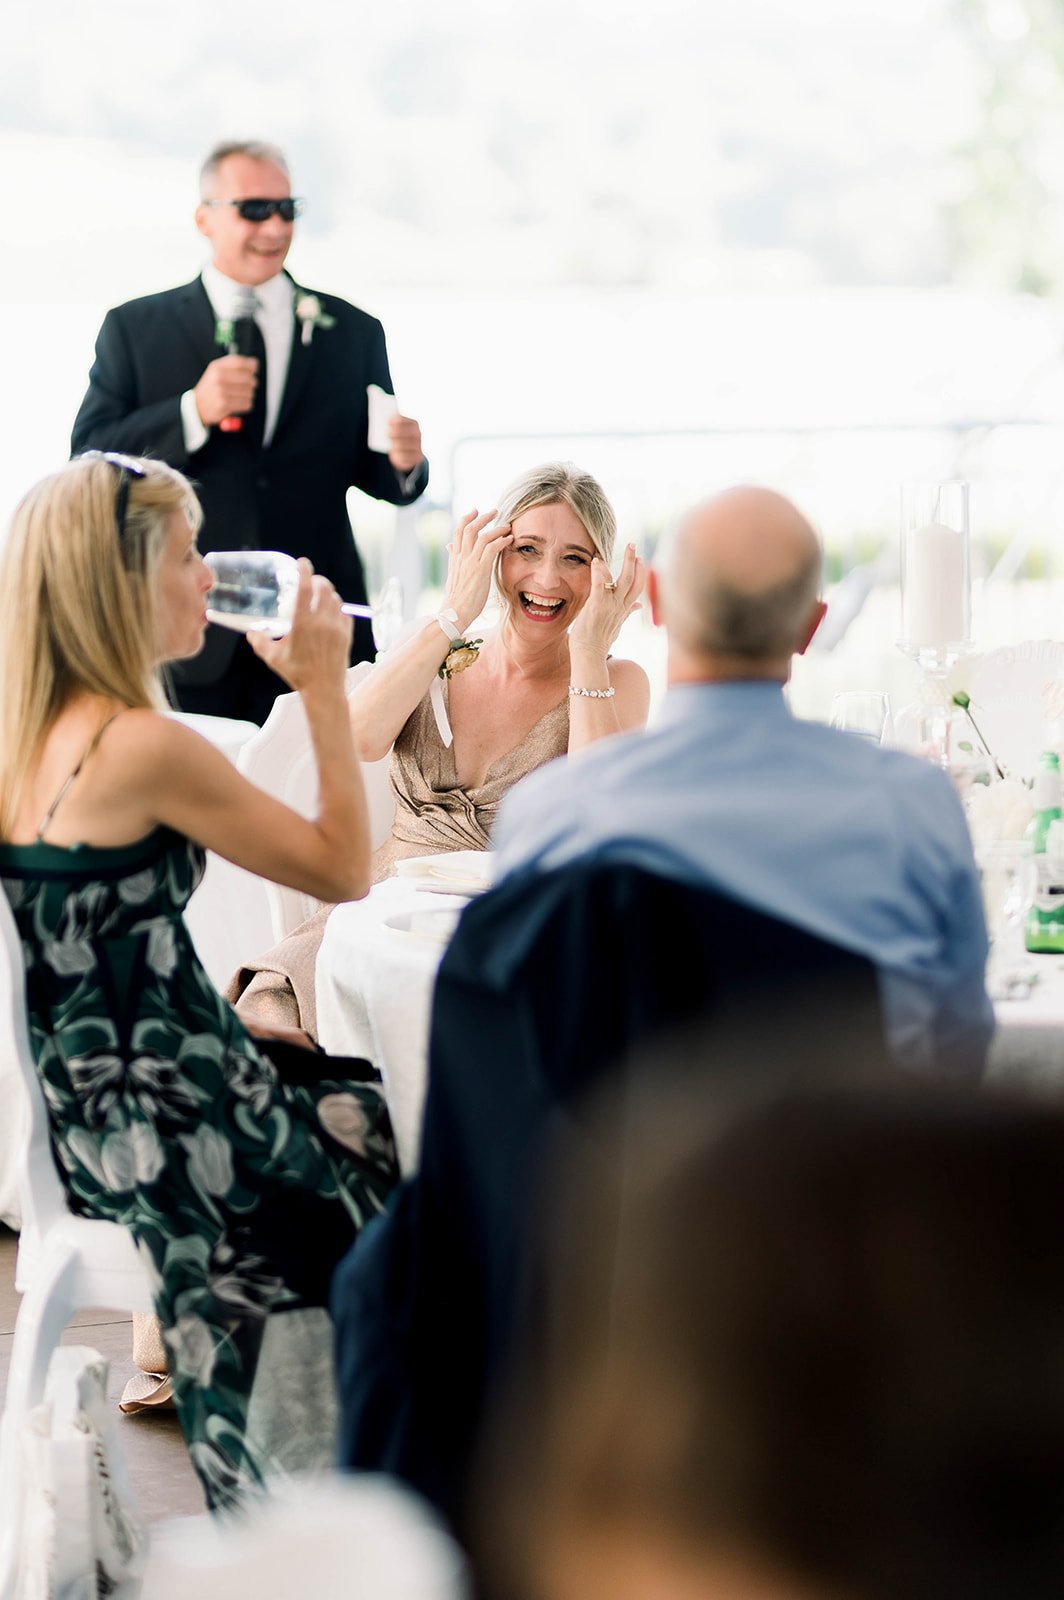 Wedding guests laugh merrily during dinner at a Hart House wedding reception.